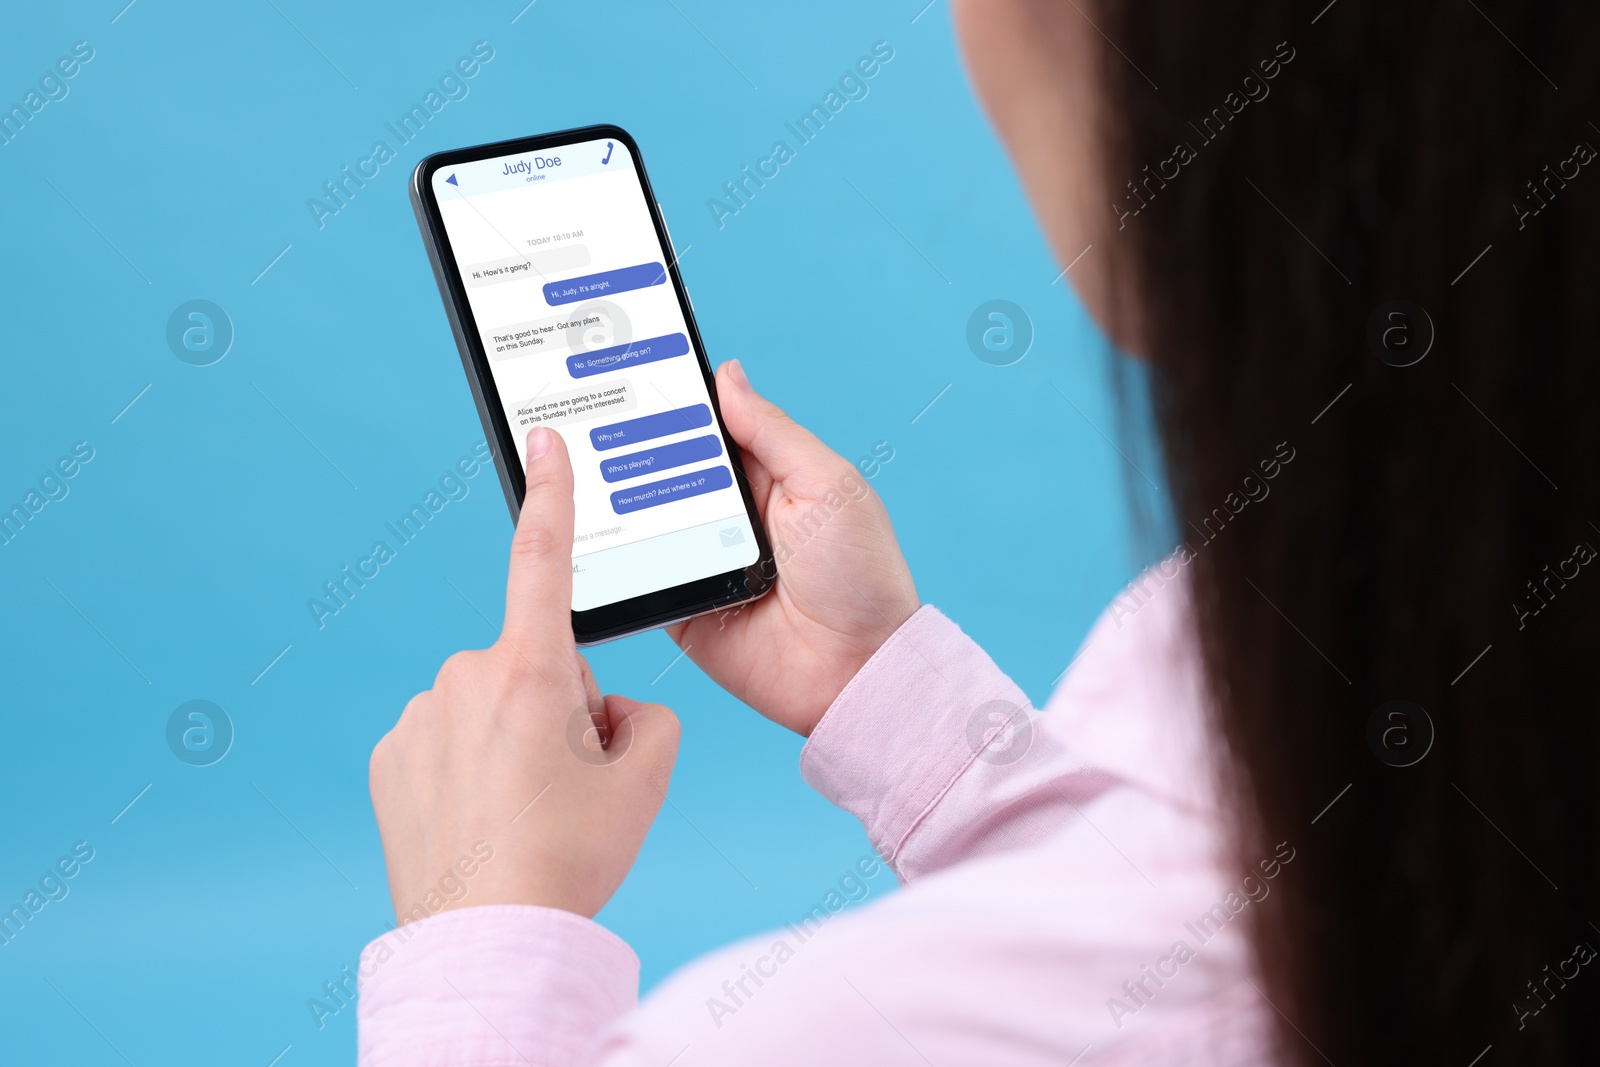 Image of Woman texting with friend using messaging application on smartphone against light blue background, closeup